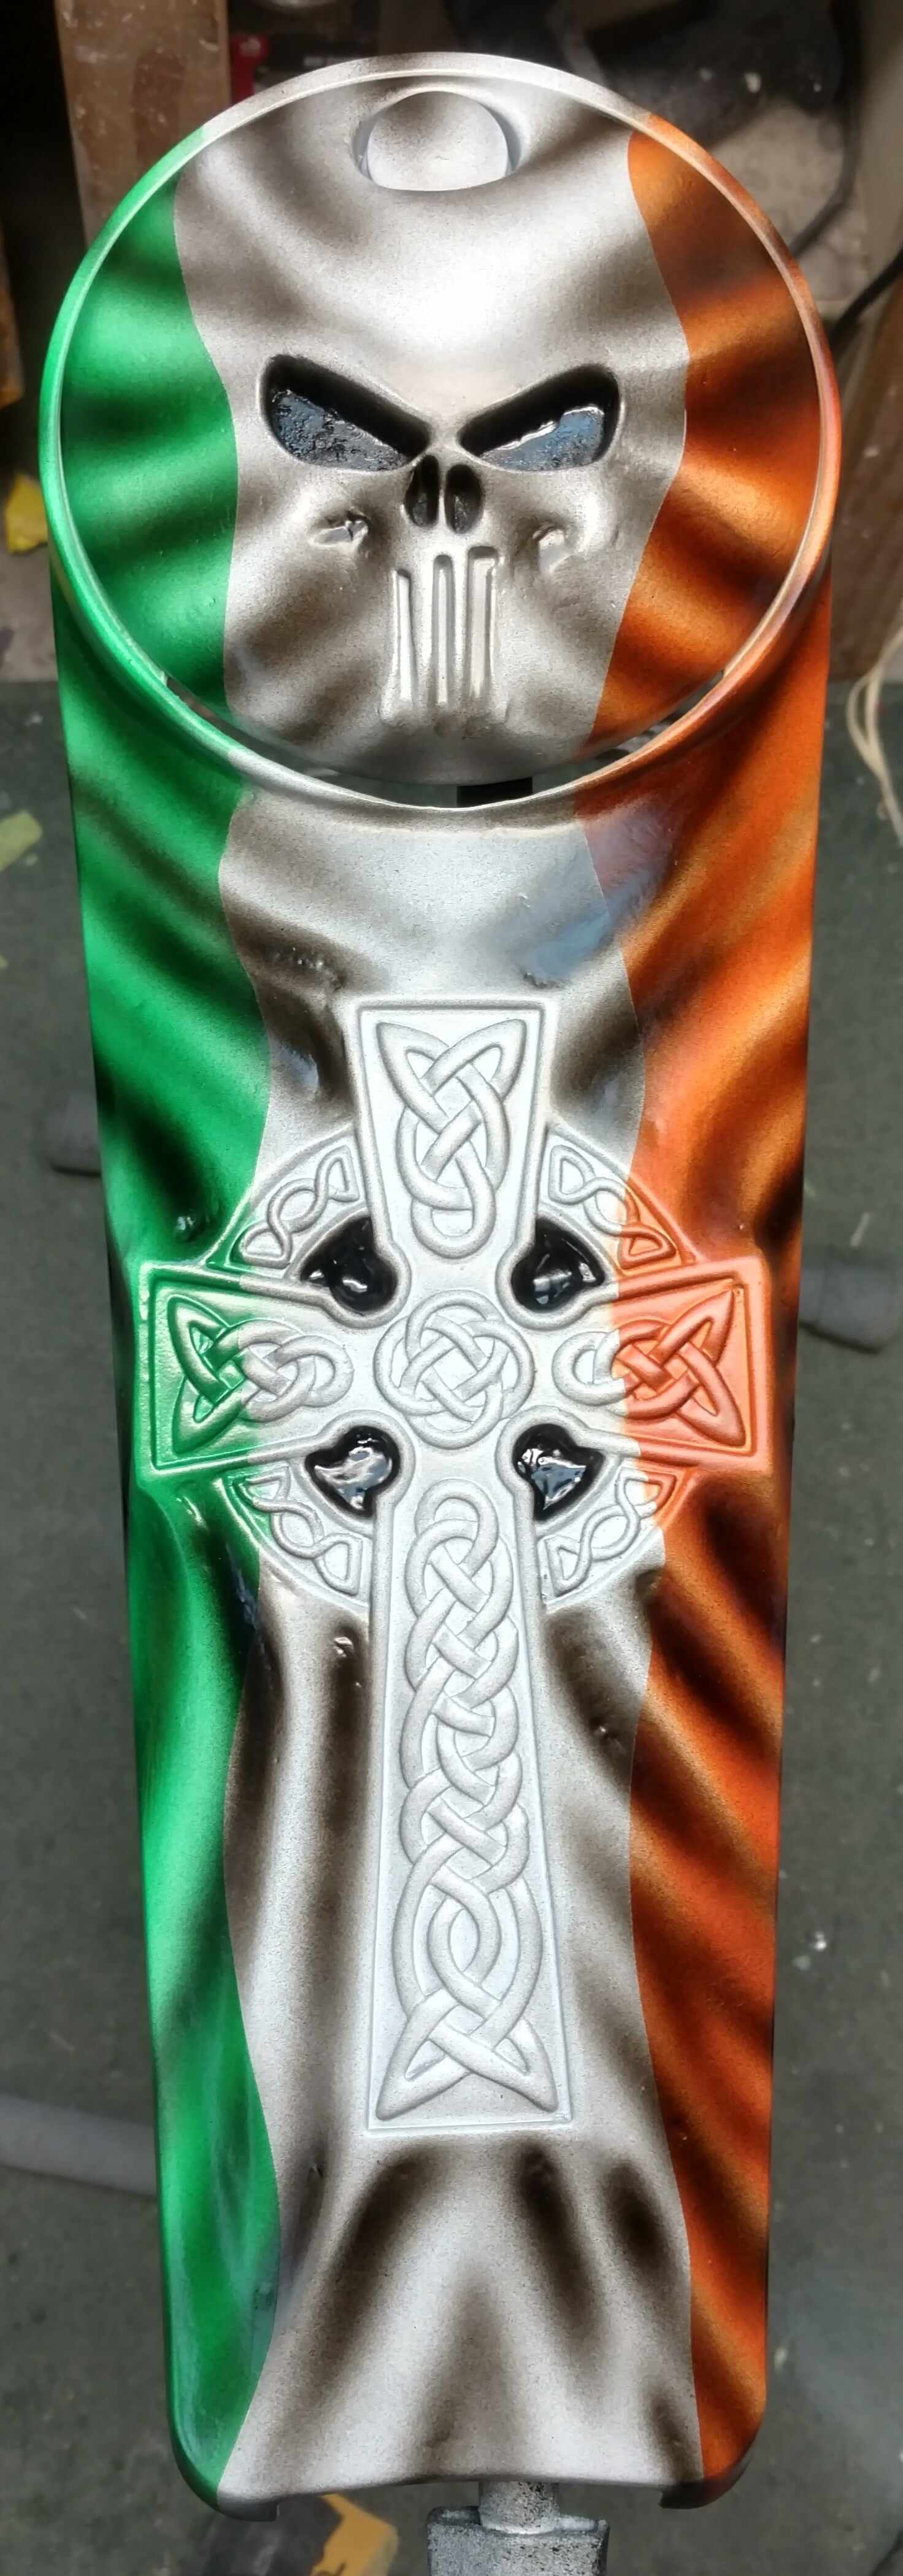 Harley Motorcycle Harley Davidson Touring Console Irish-themed With Knotted Cross